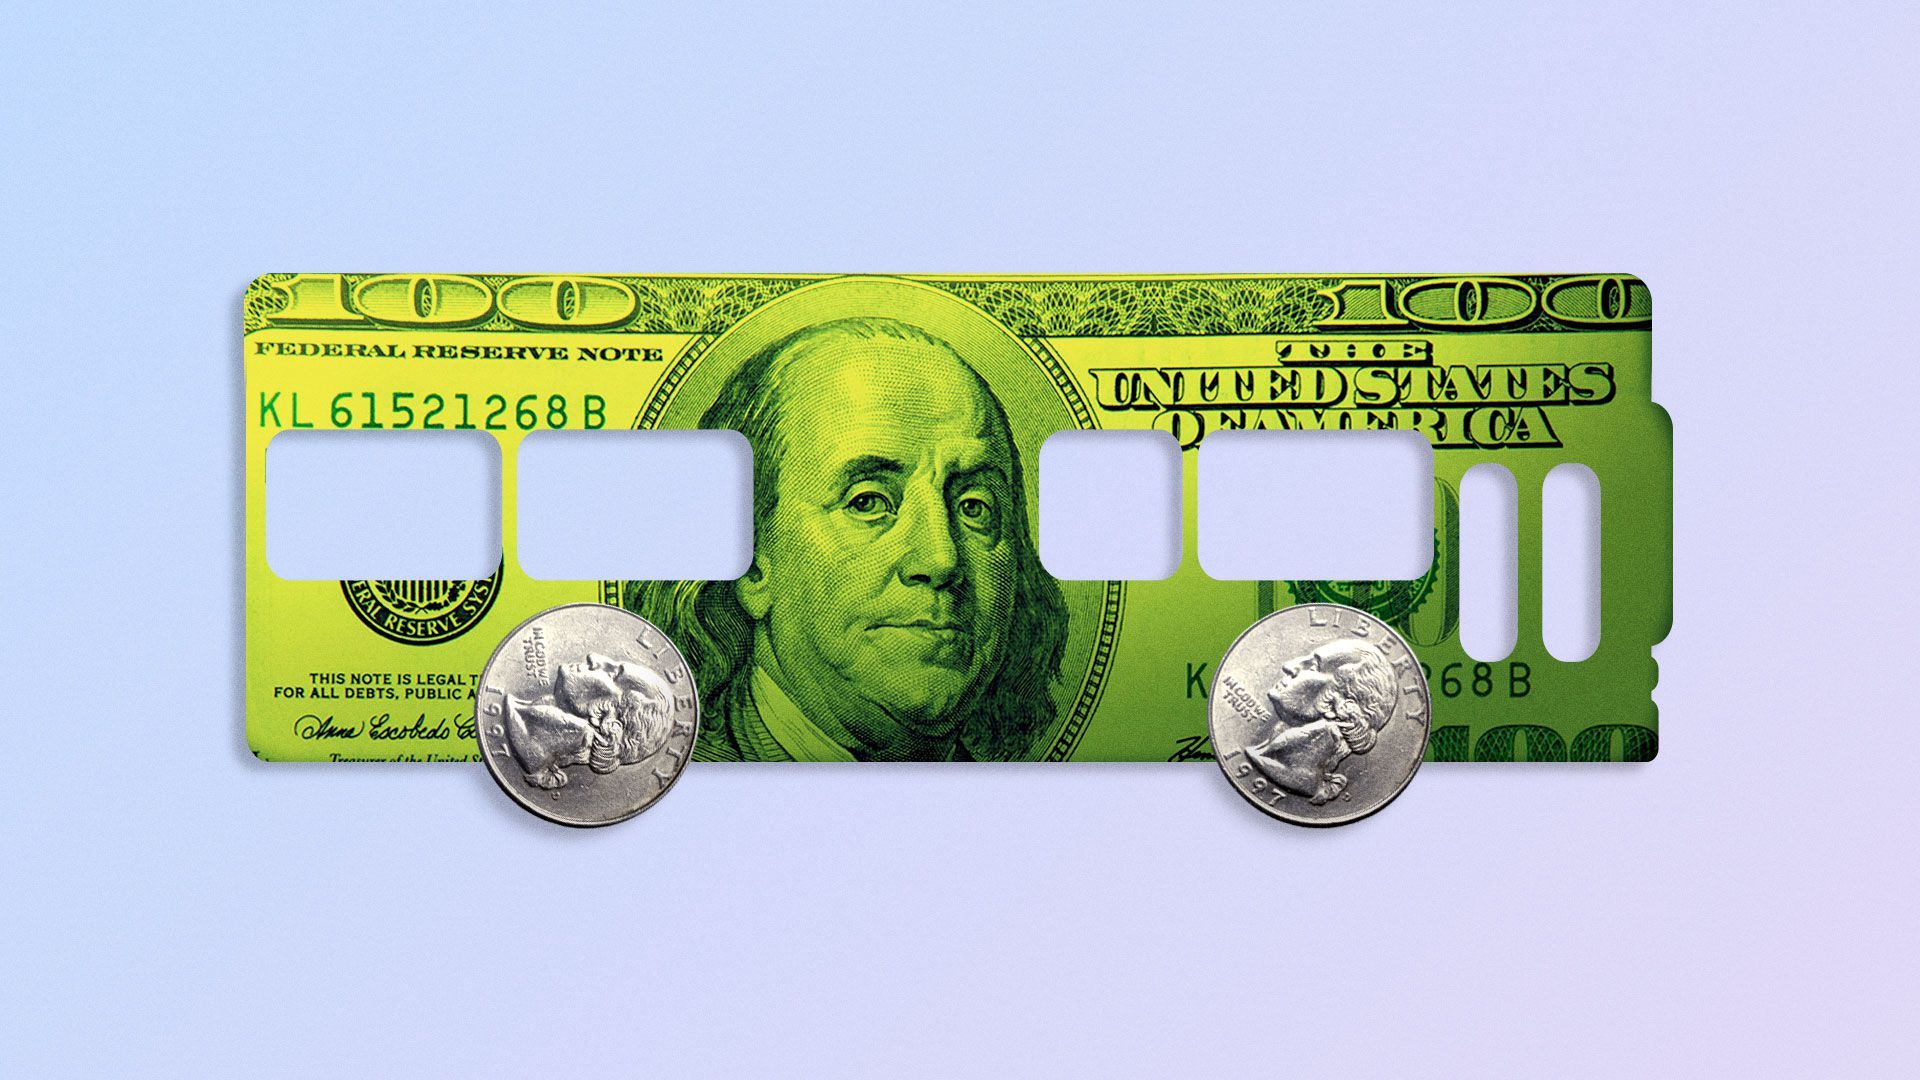 Illustration of a public bus made of a $100 bill and quarters